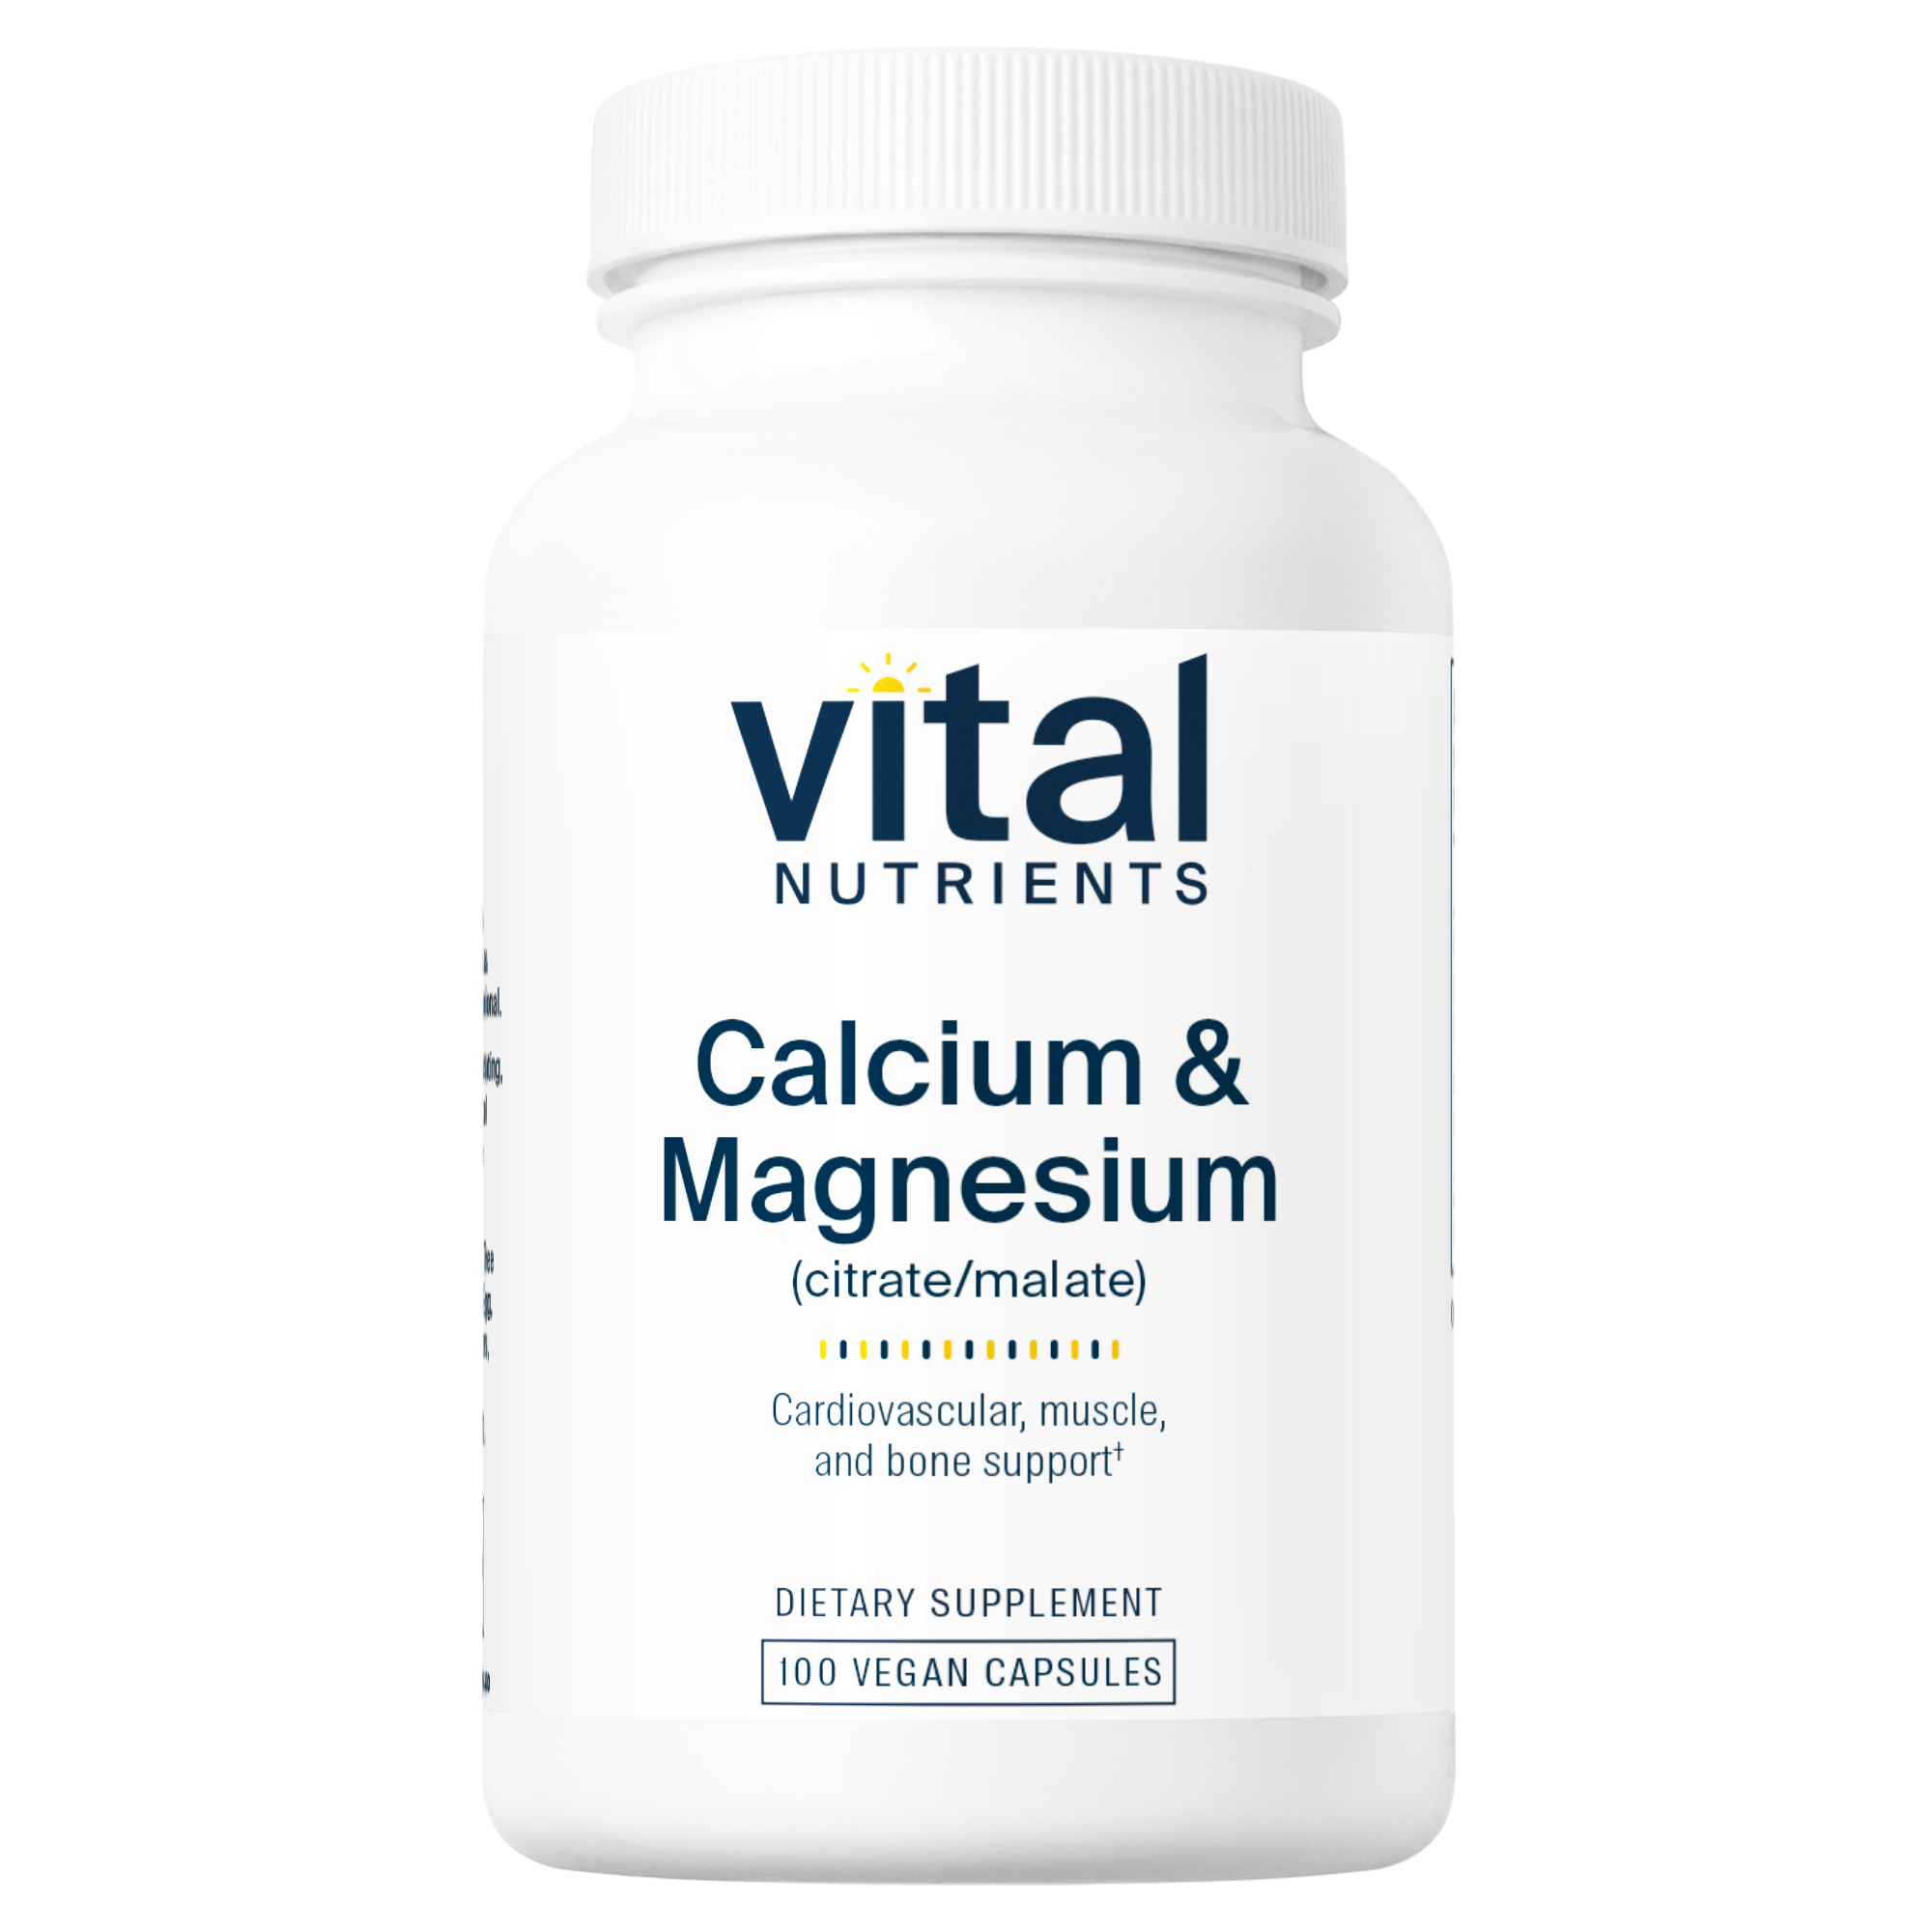 Vital Nutrients Calcium and Magnesium citrate/malate  bottle